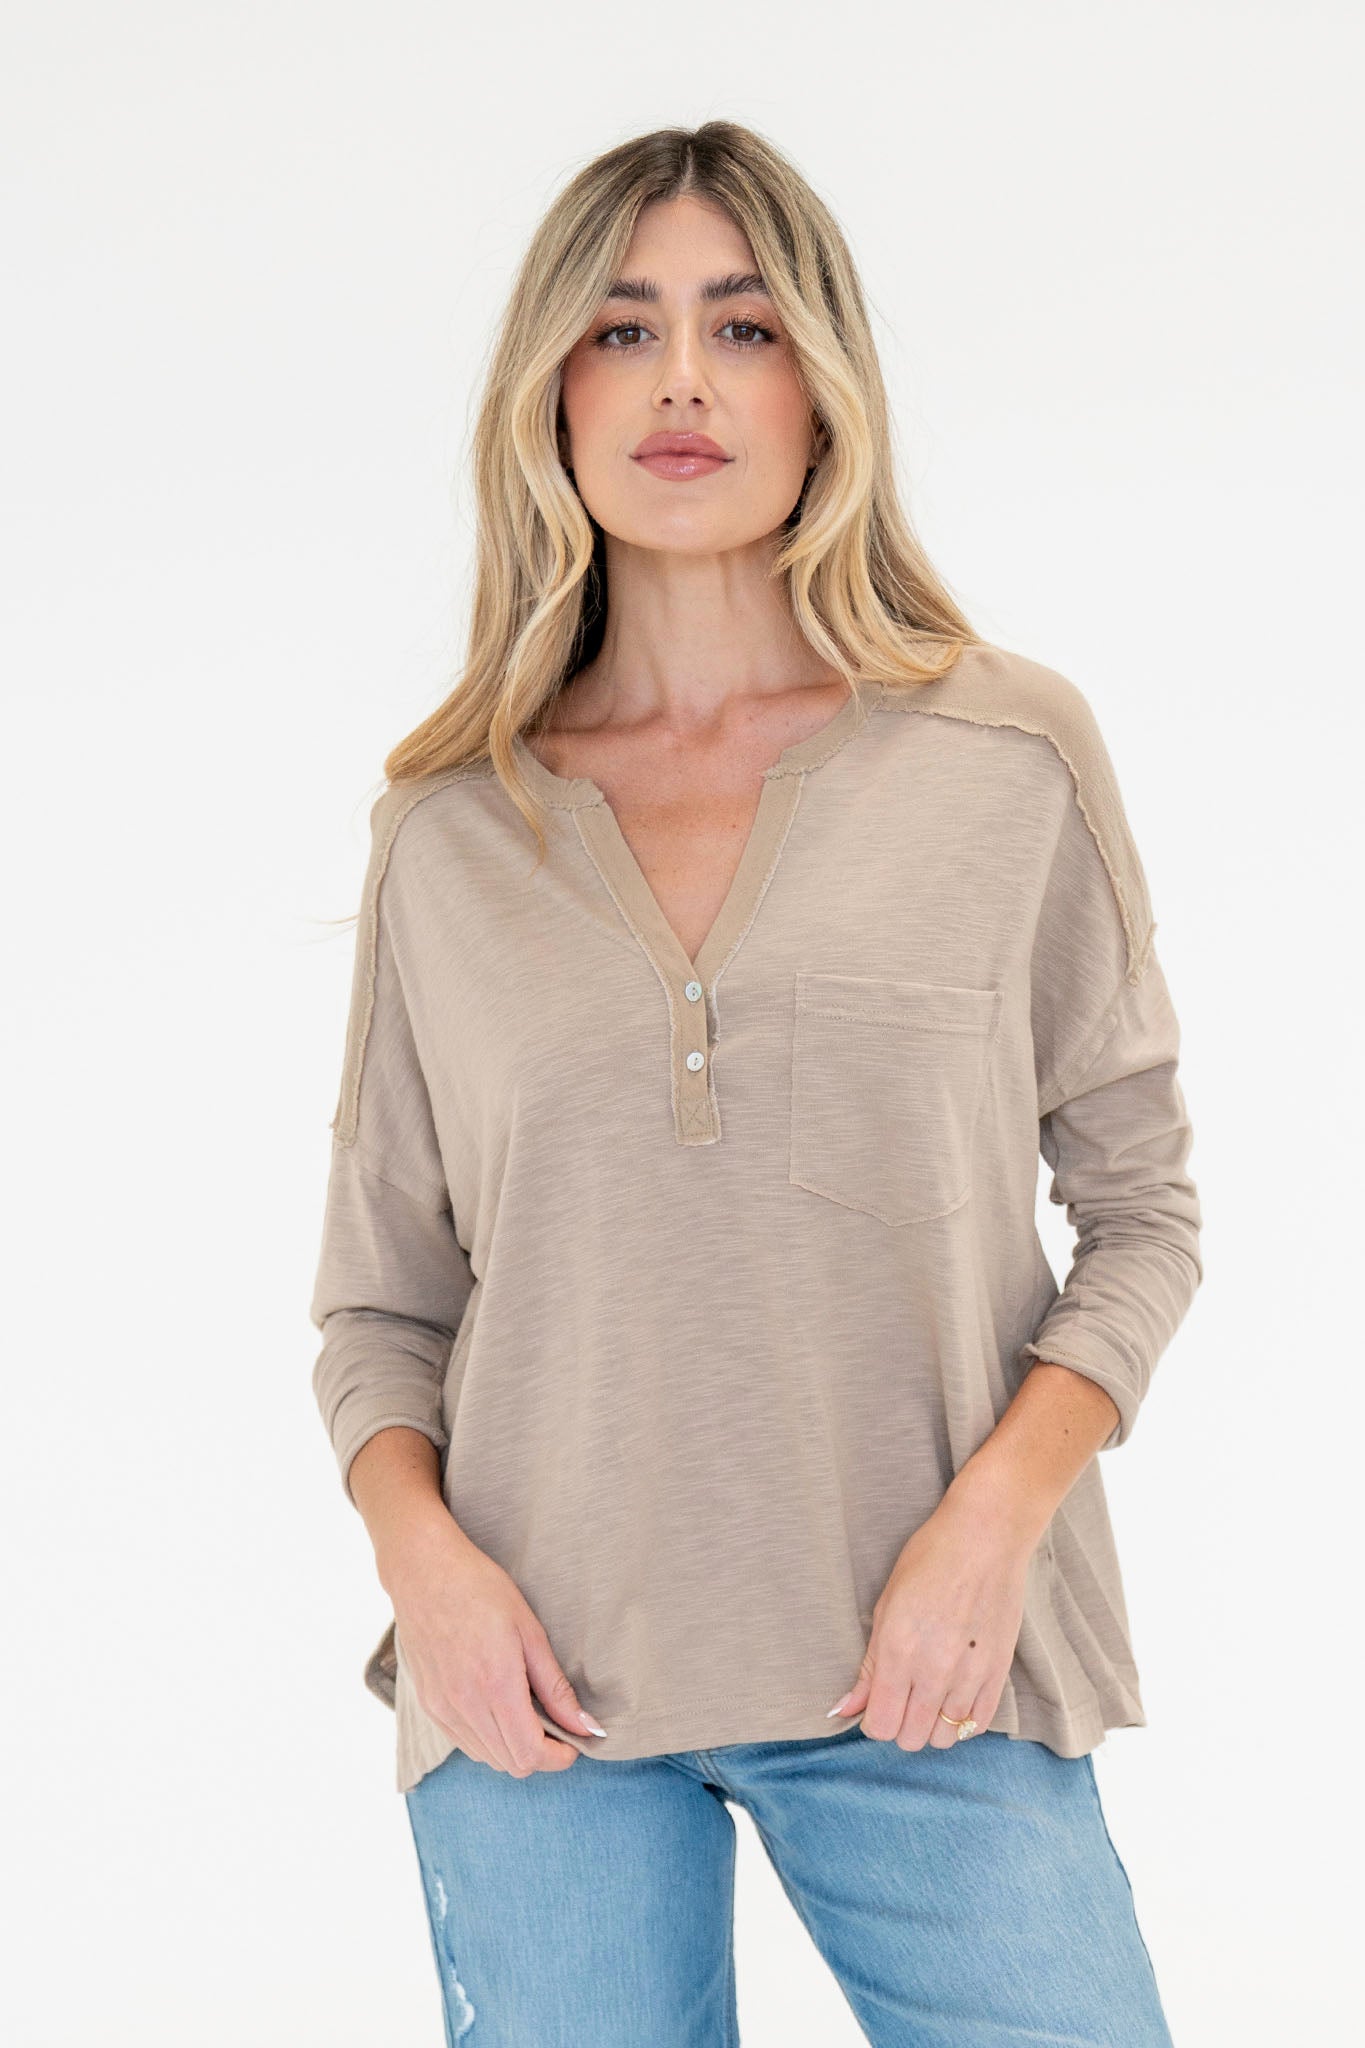 View 1 of Freesia Henley in Taupe, a Tops from Larrea Cove. Detail: Harness the power of effortless style with the Freesia Henley in Taupe.